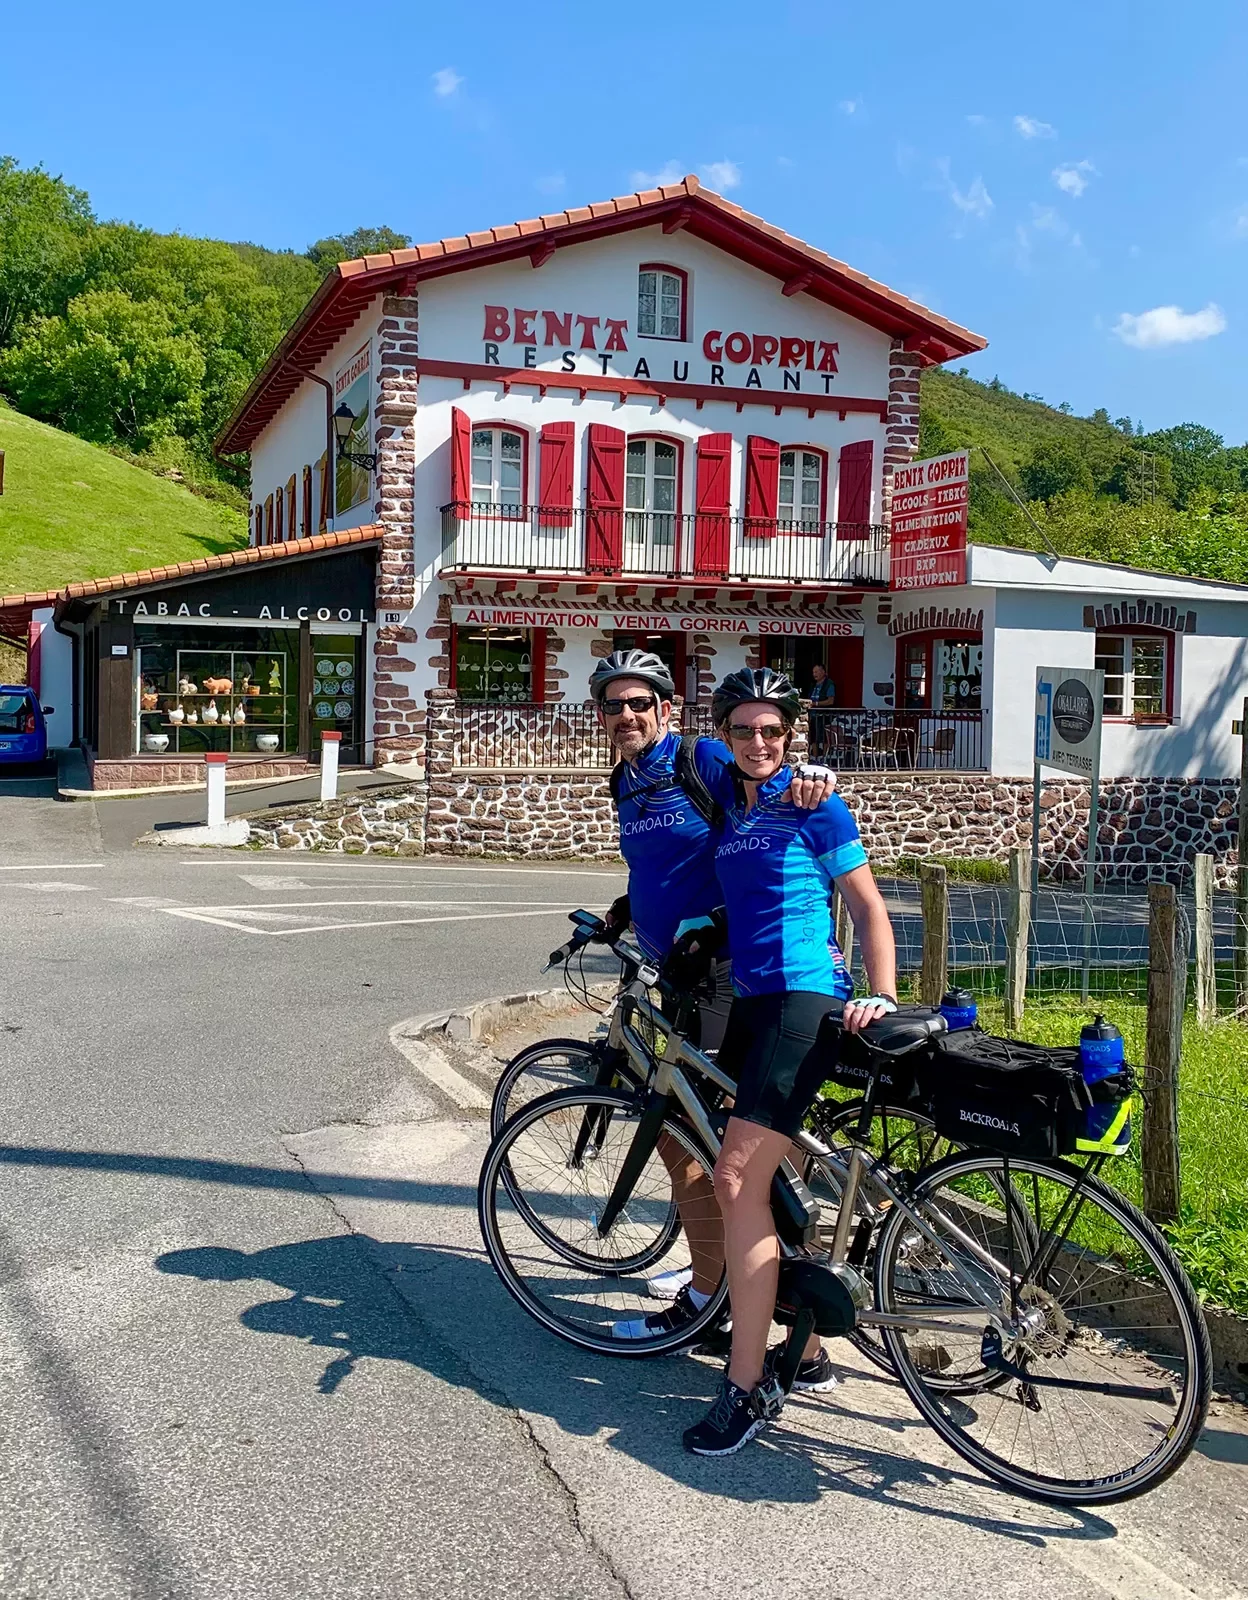 Two guests on bikes in front of &quot;Benta Gorria&quot;, a red and white building.